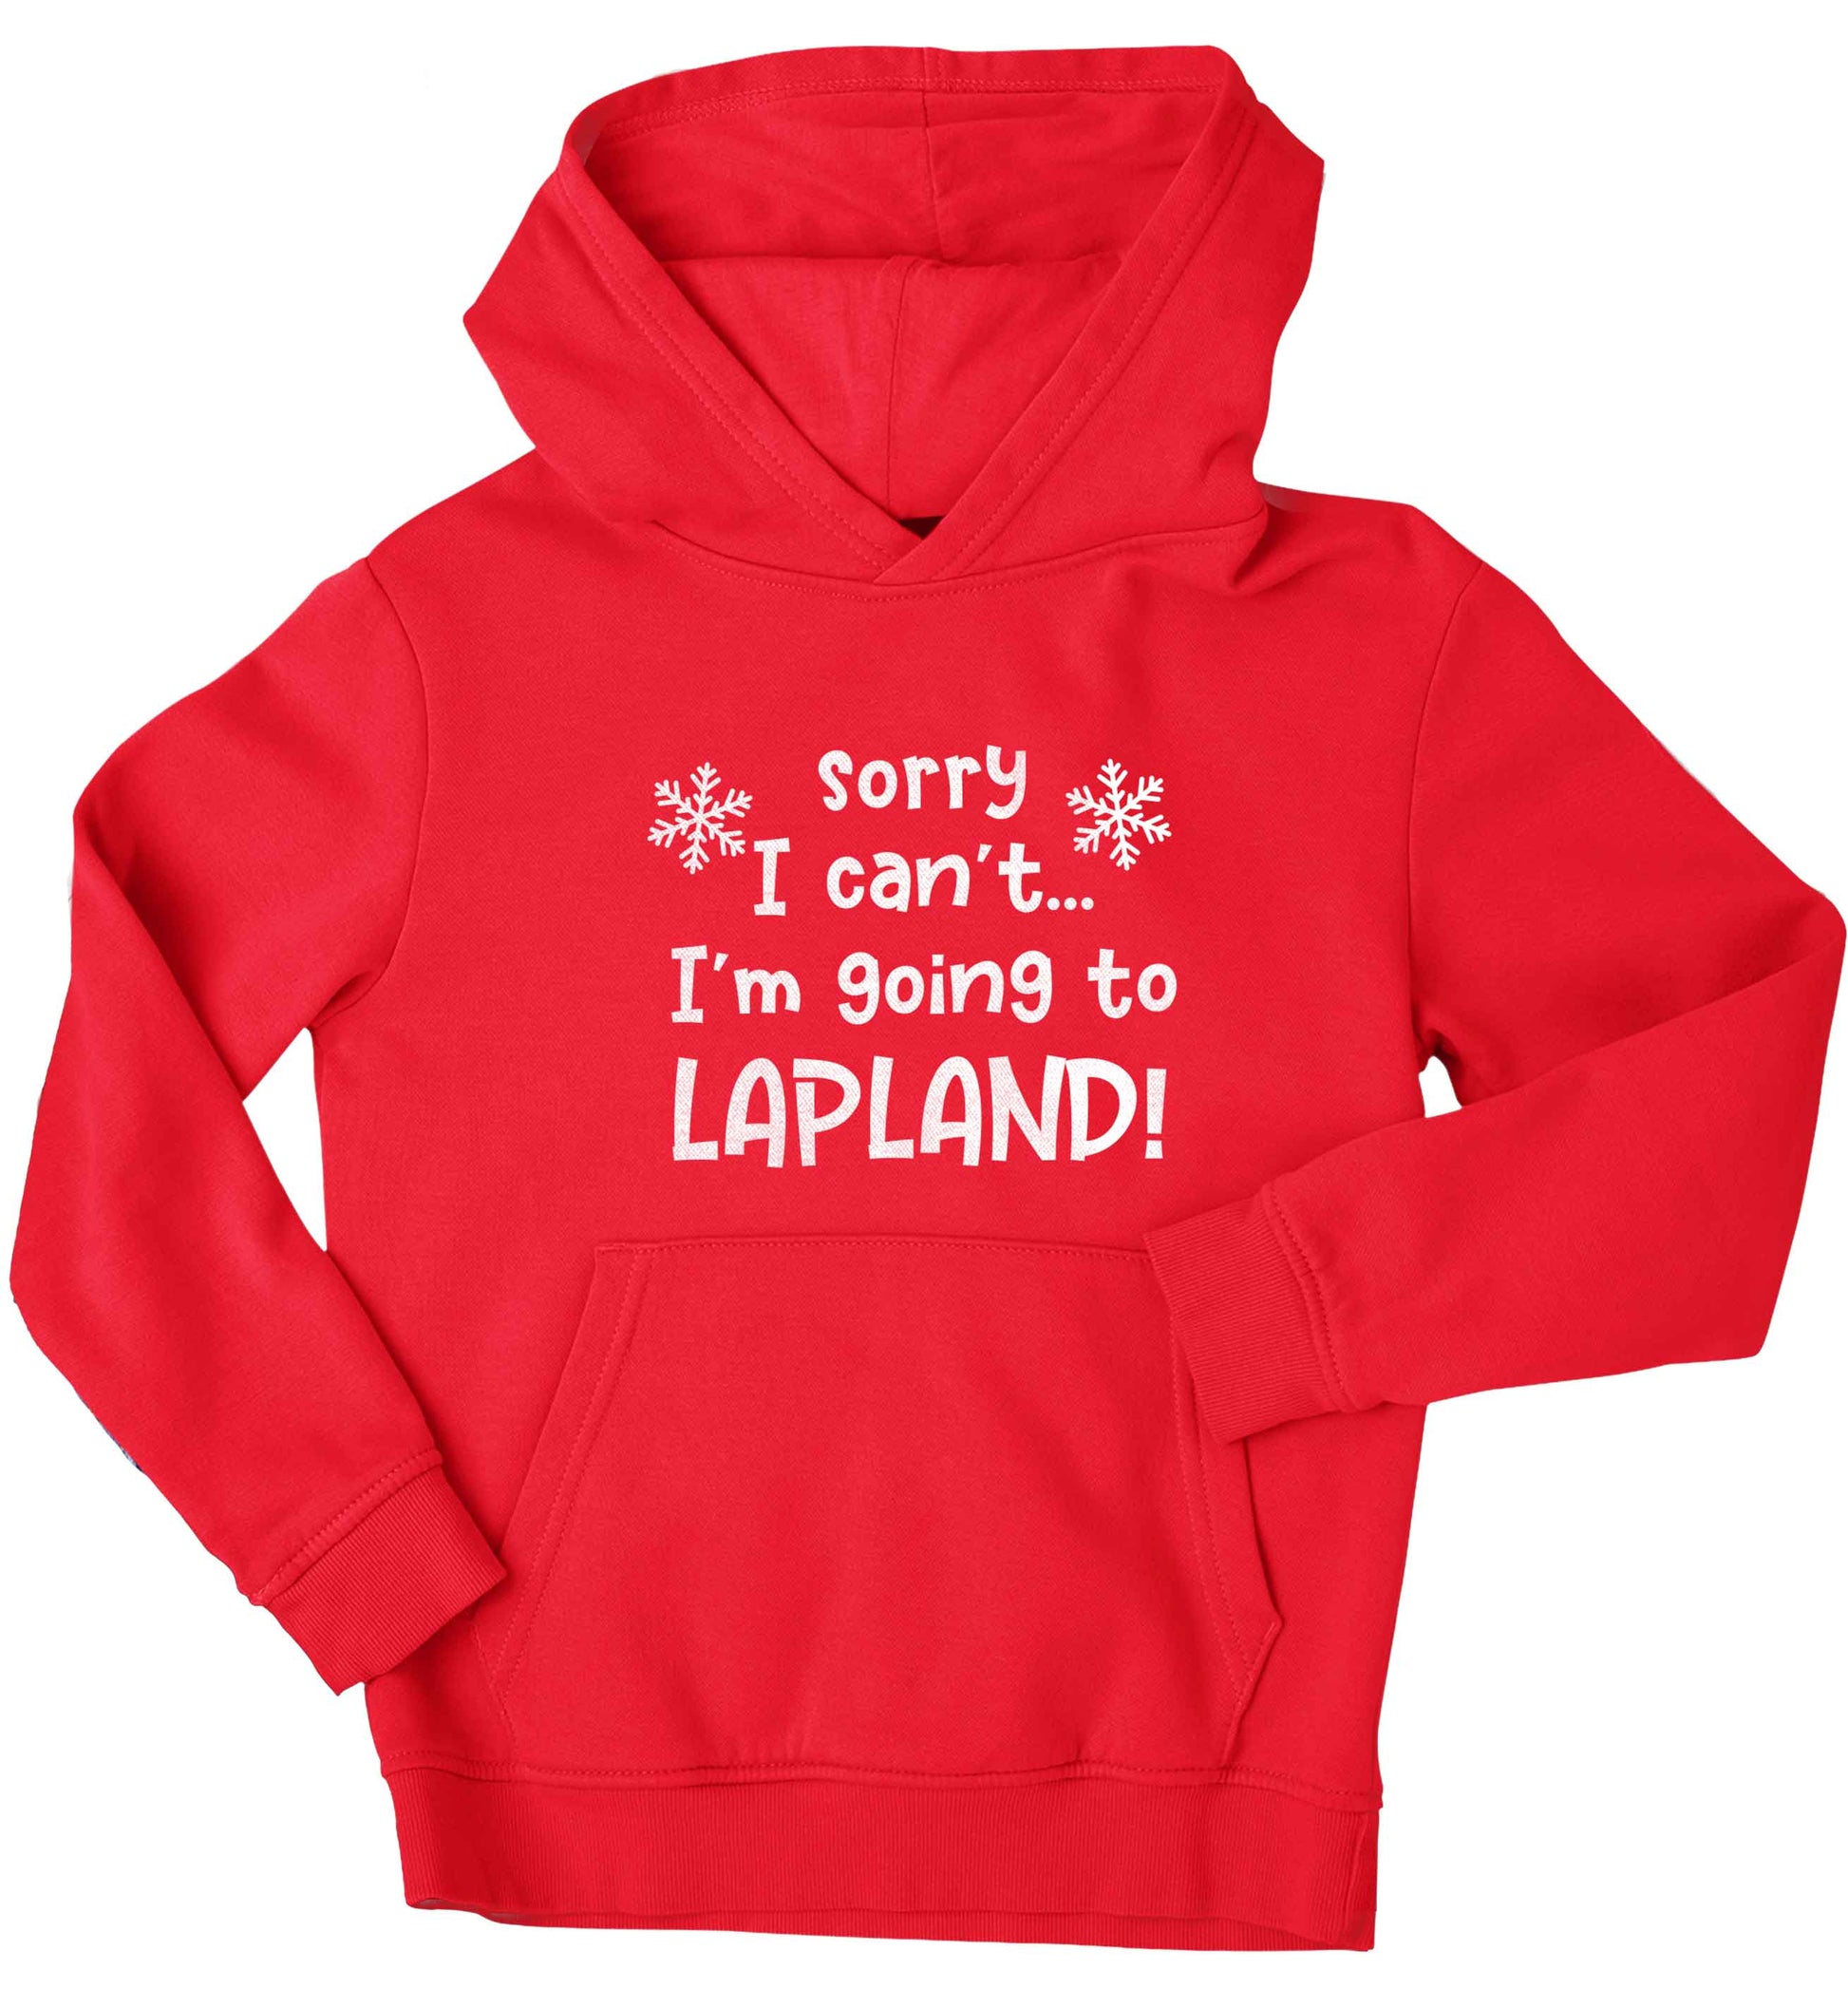 Sorry I can't I'm going to Lapland children's red hoodie 12-13 Years